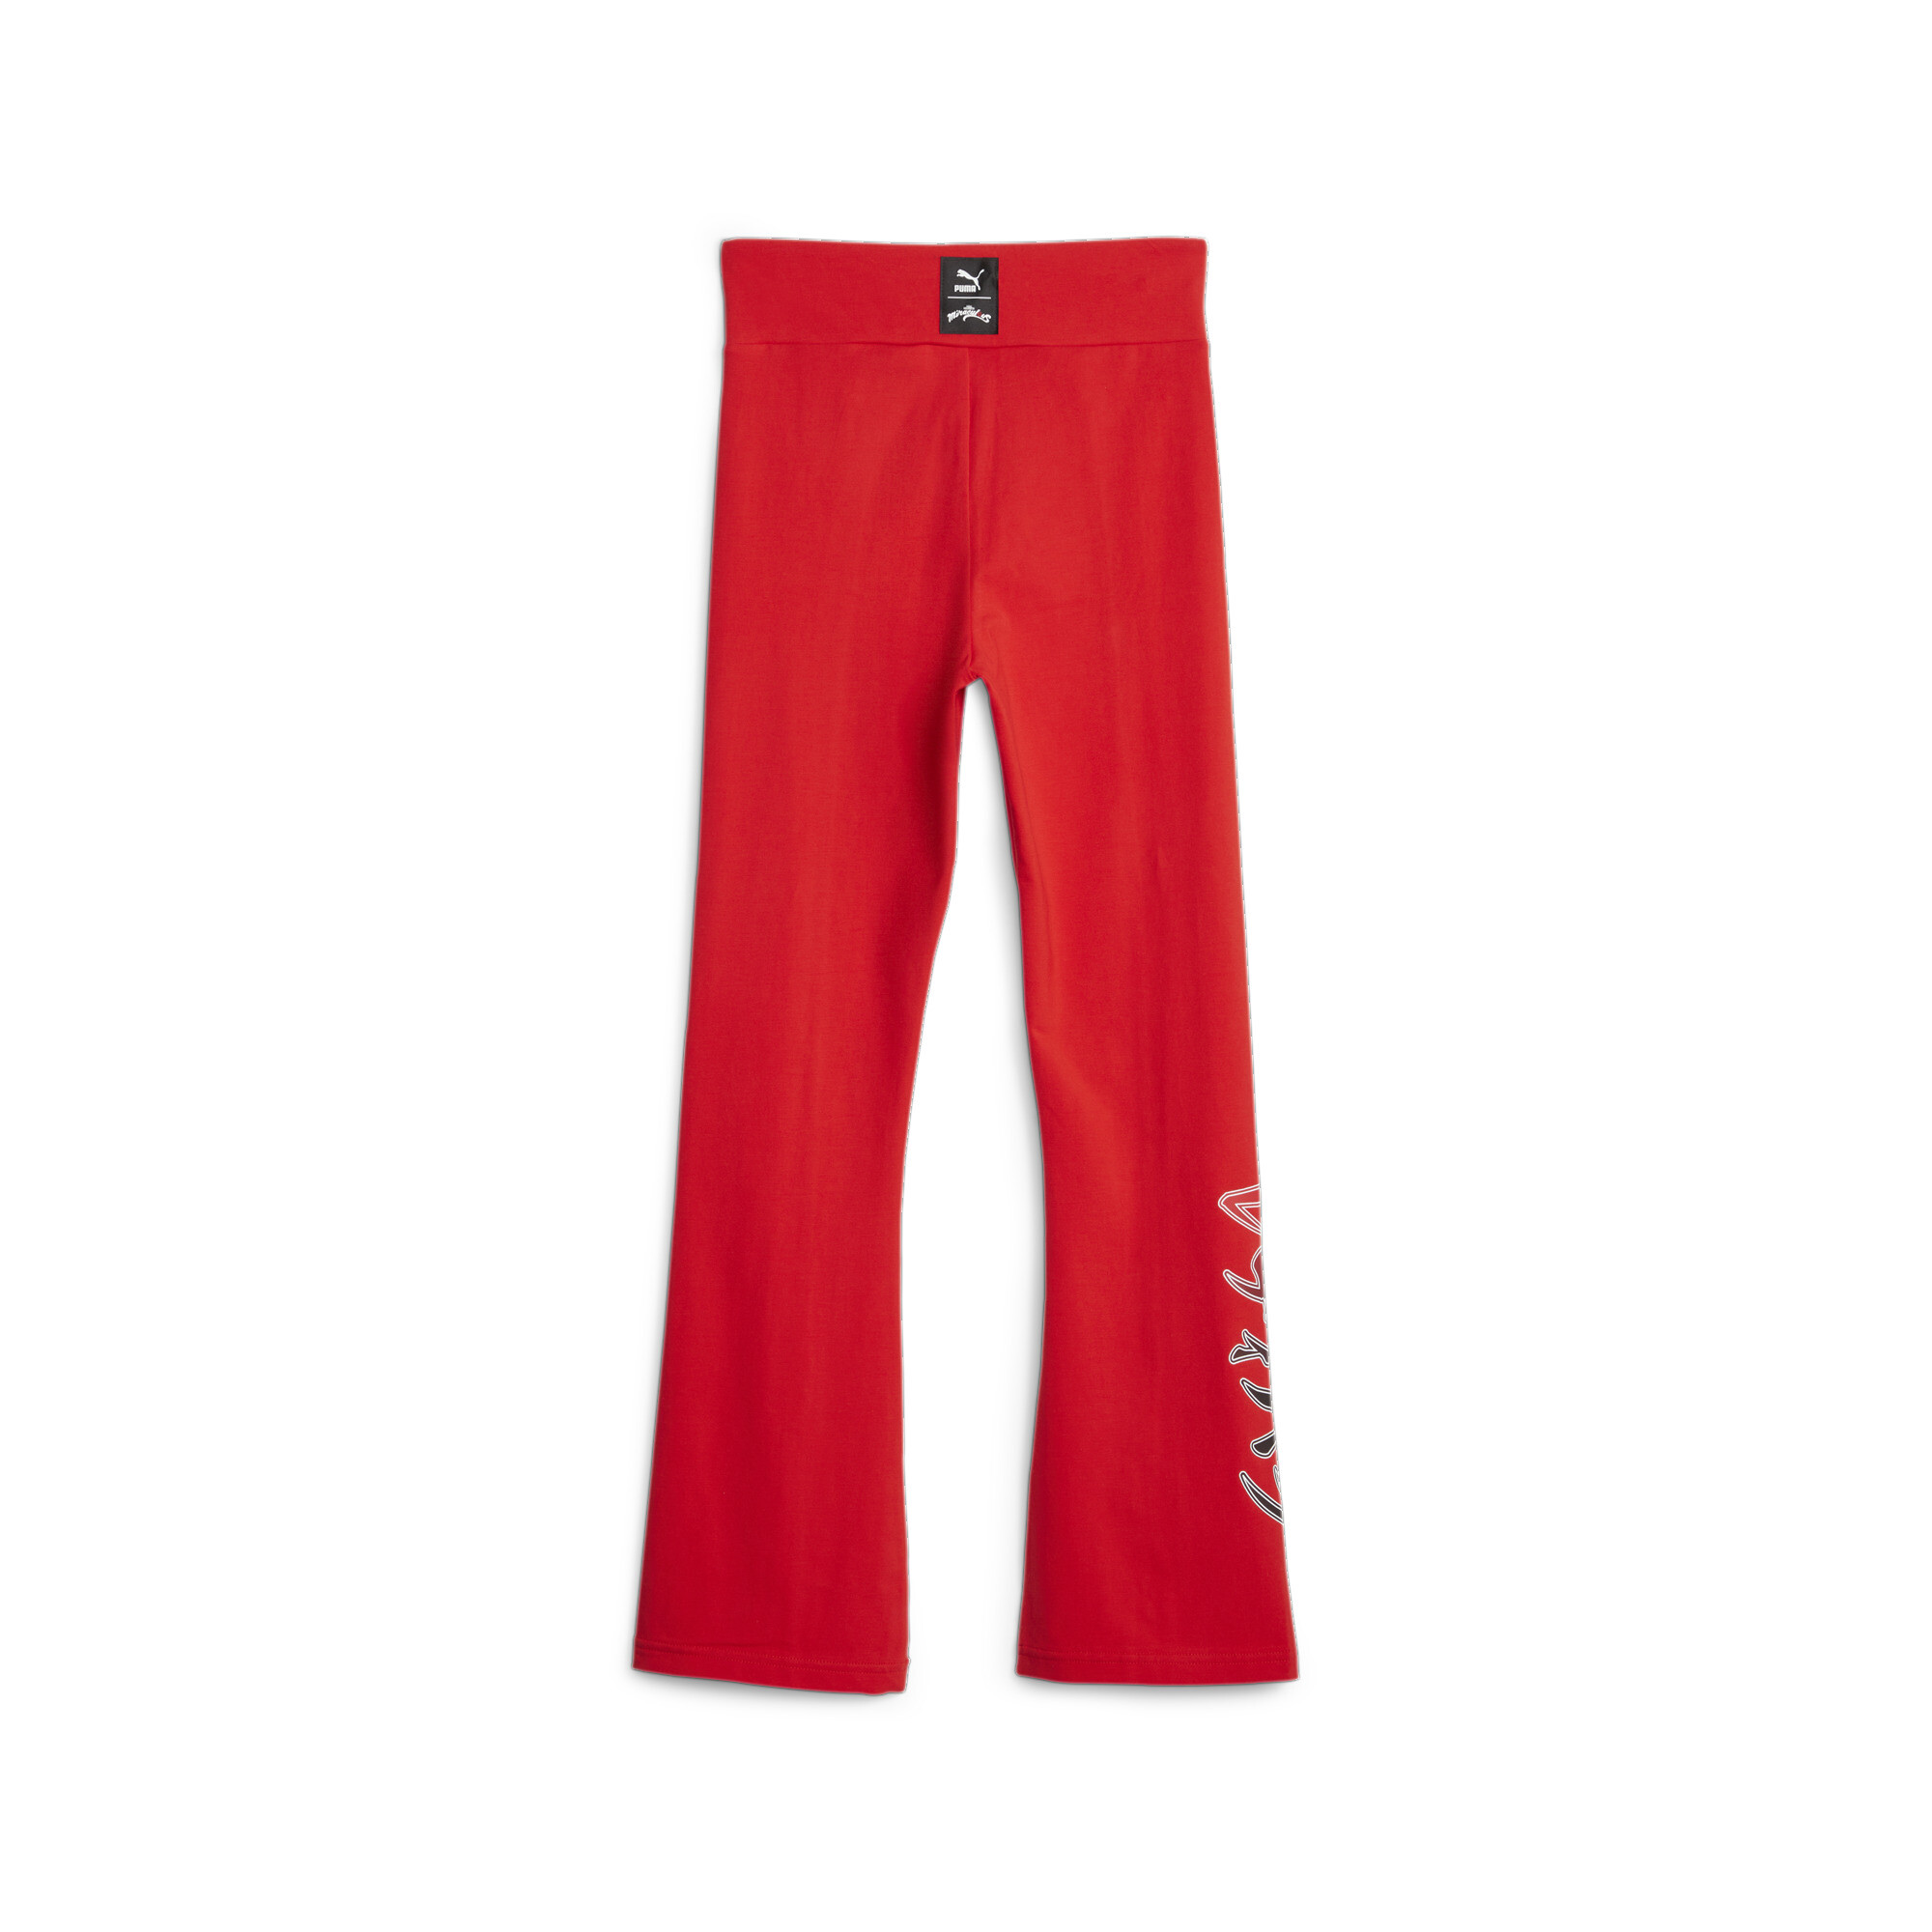 PUMA X MIRACULOUS Leggings In Red, Size 7-8 Youth